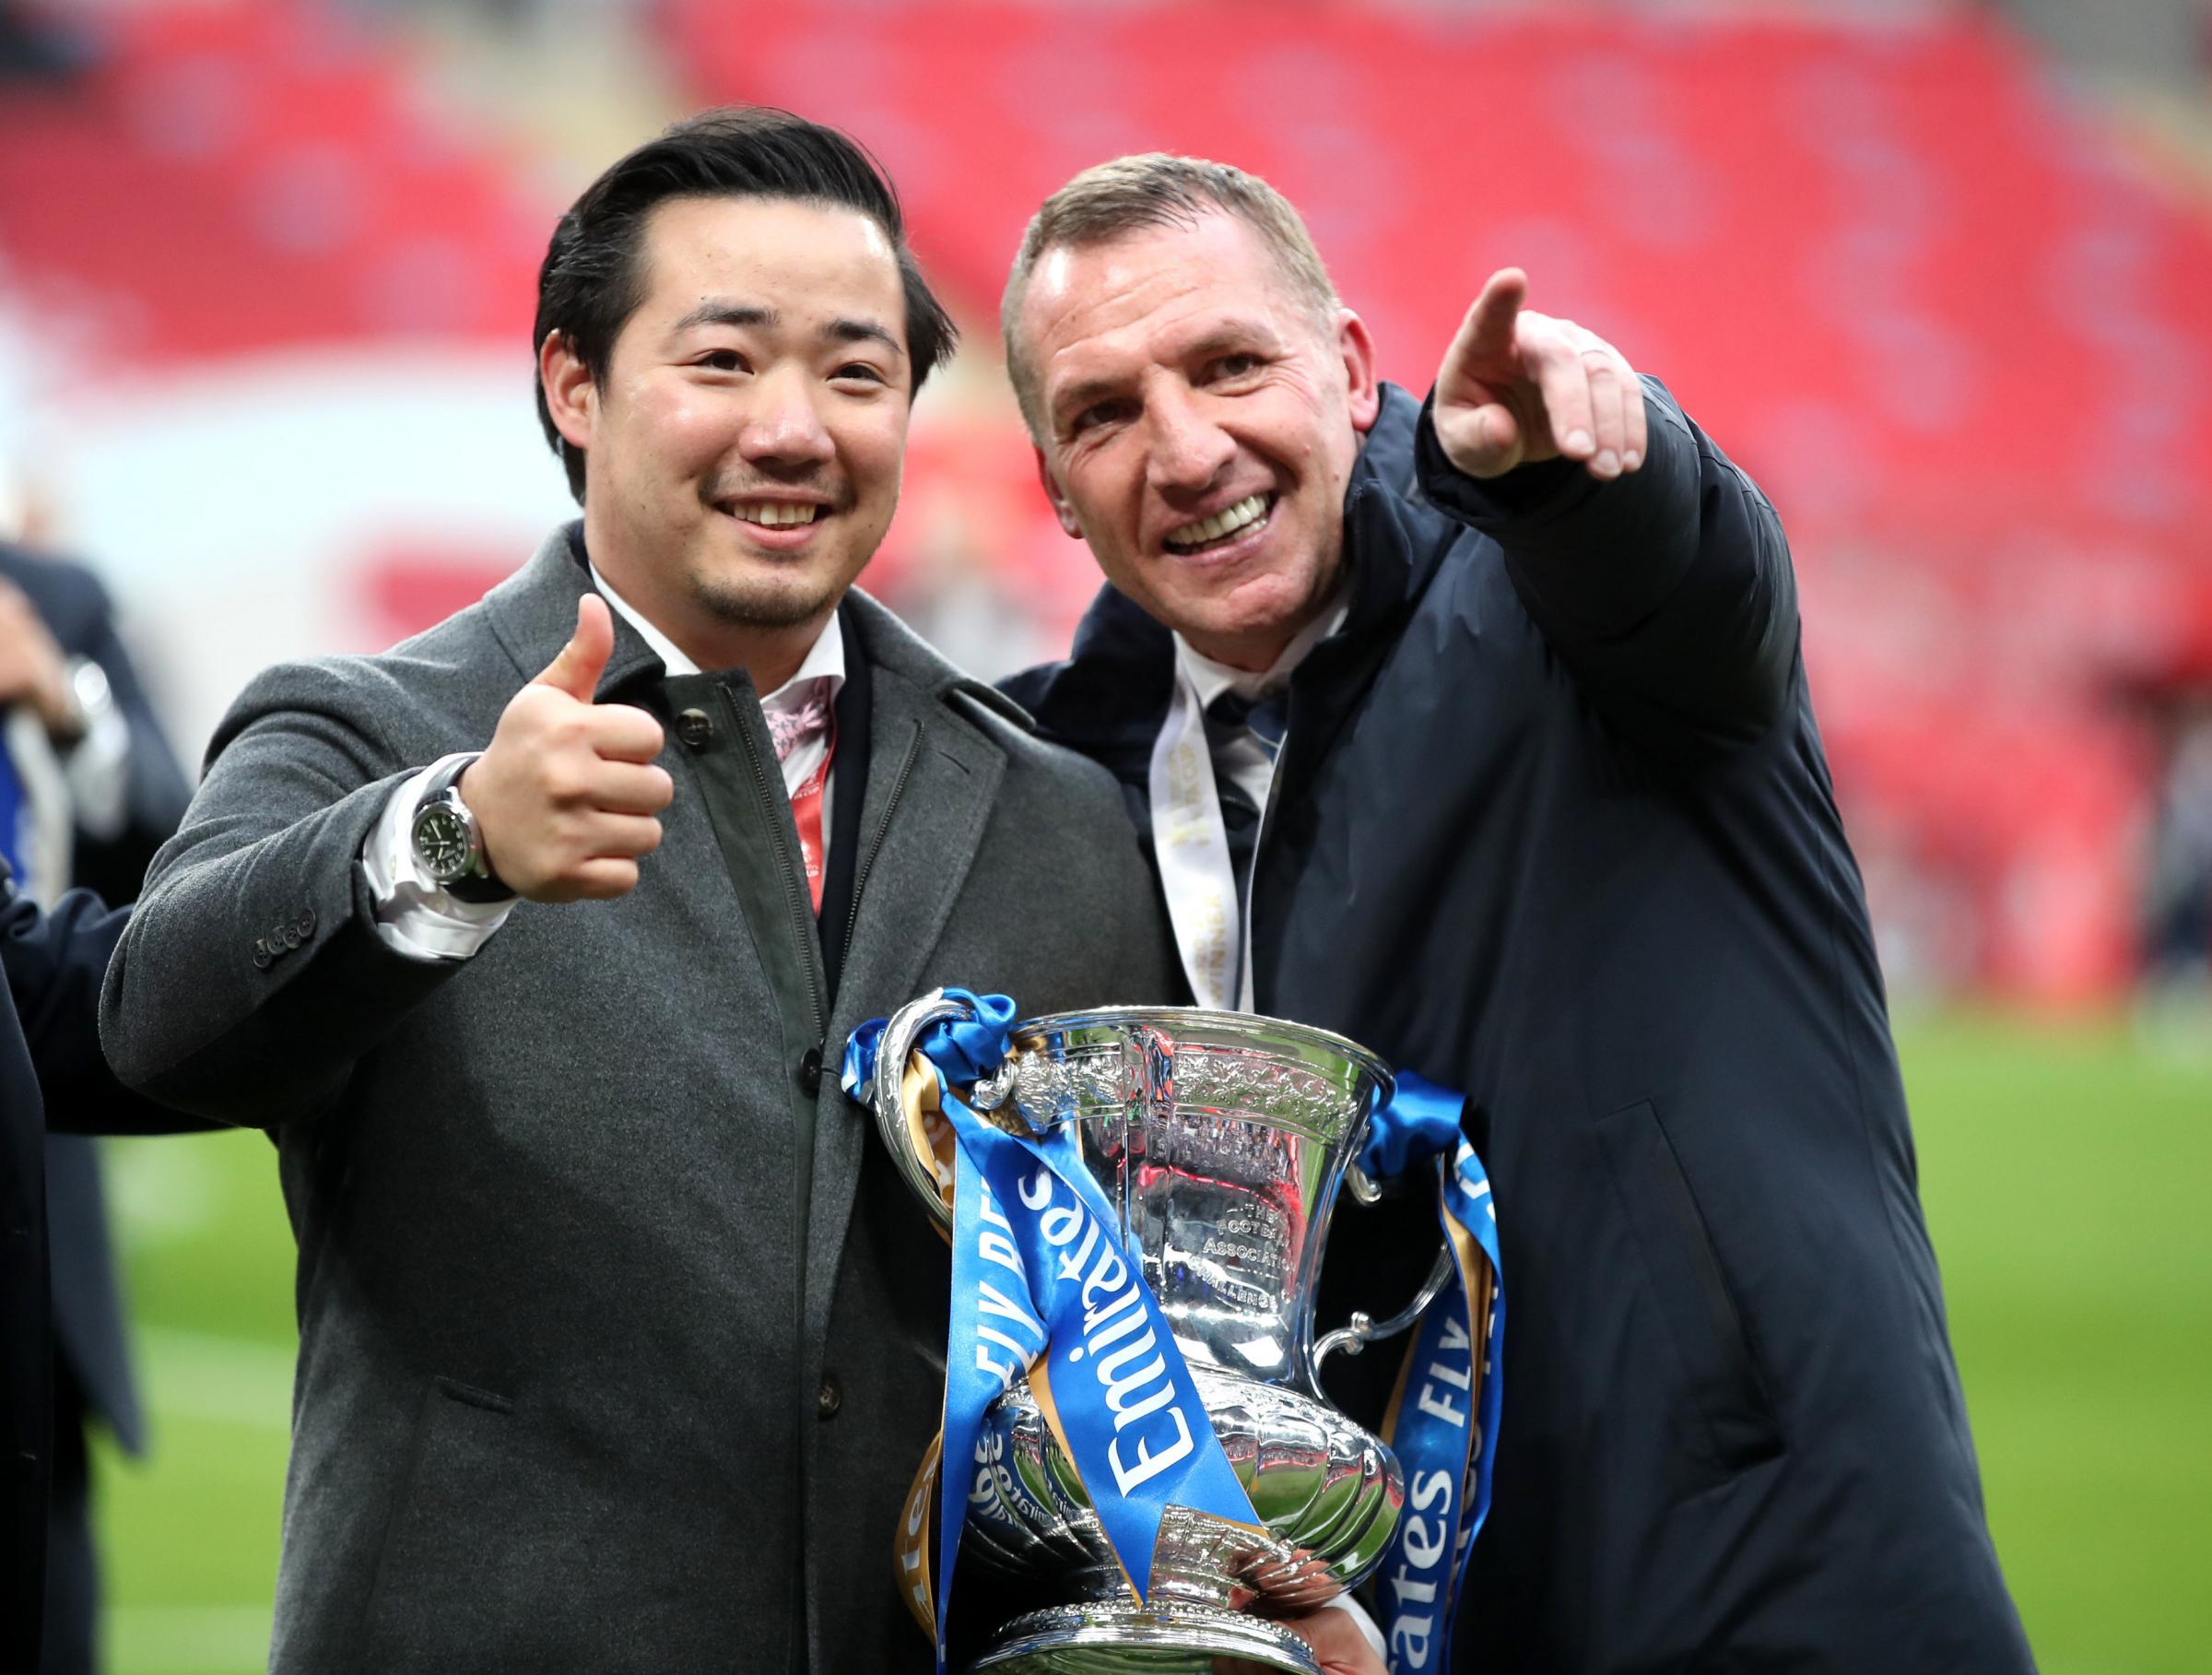 Brendan Rodgers will see his side arrive in Bucks at the end of July (PA)